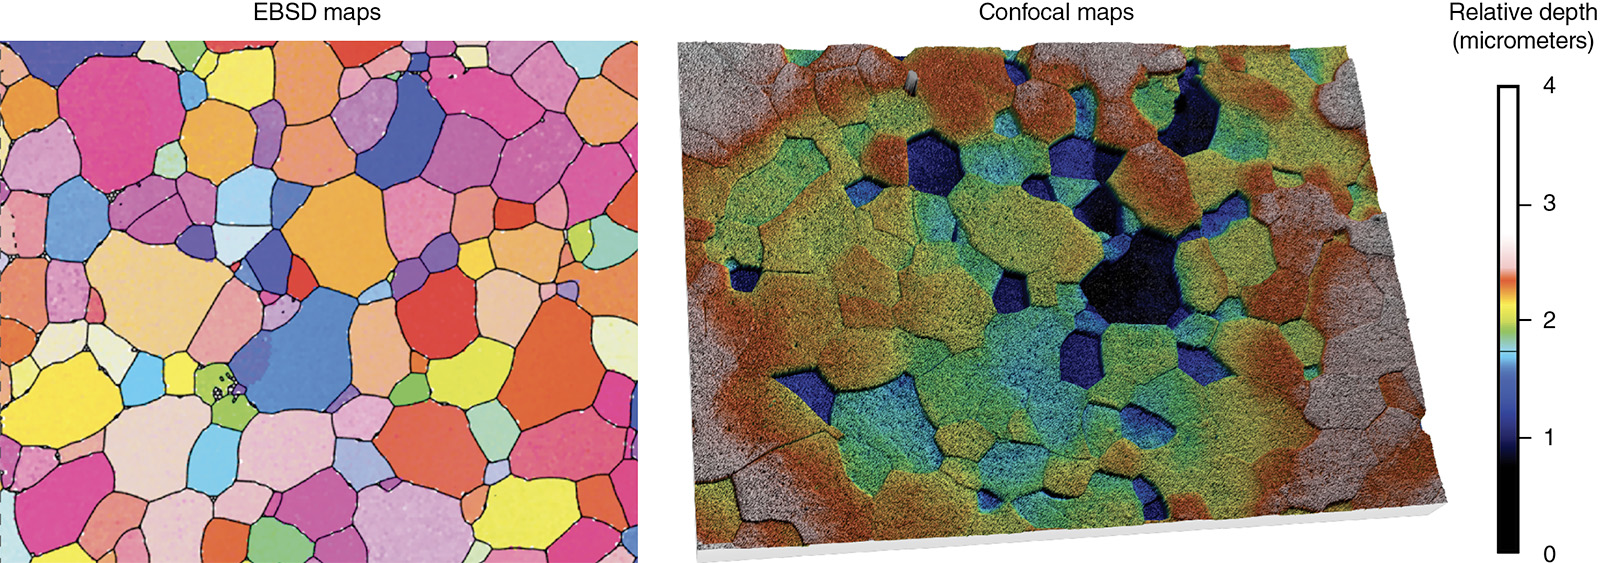 two images of maps with multi-color patches and a scale indicating relative depth, in micrometers, of corroded areas by colors on the maps